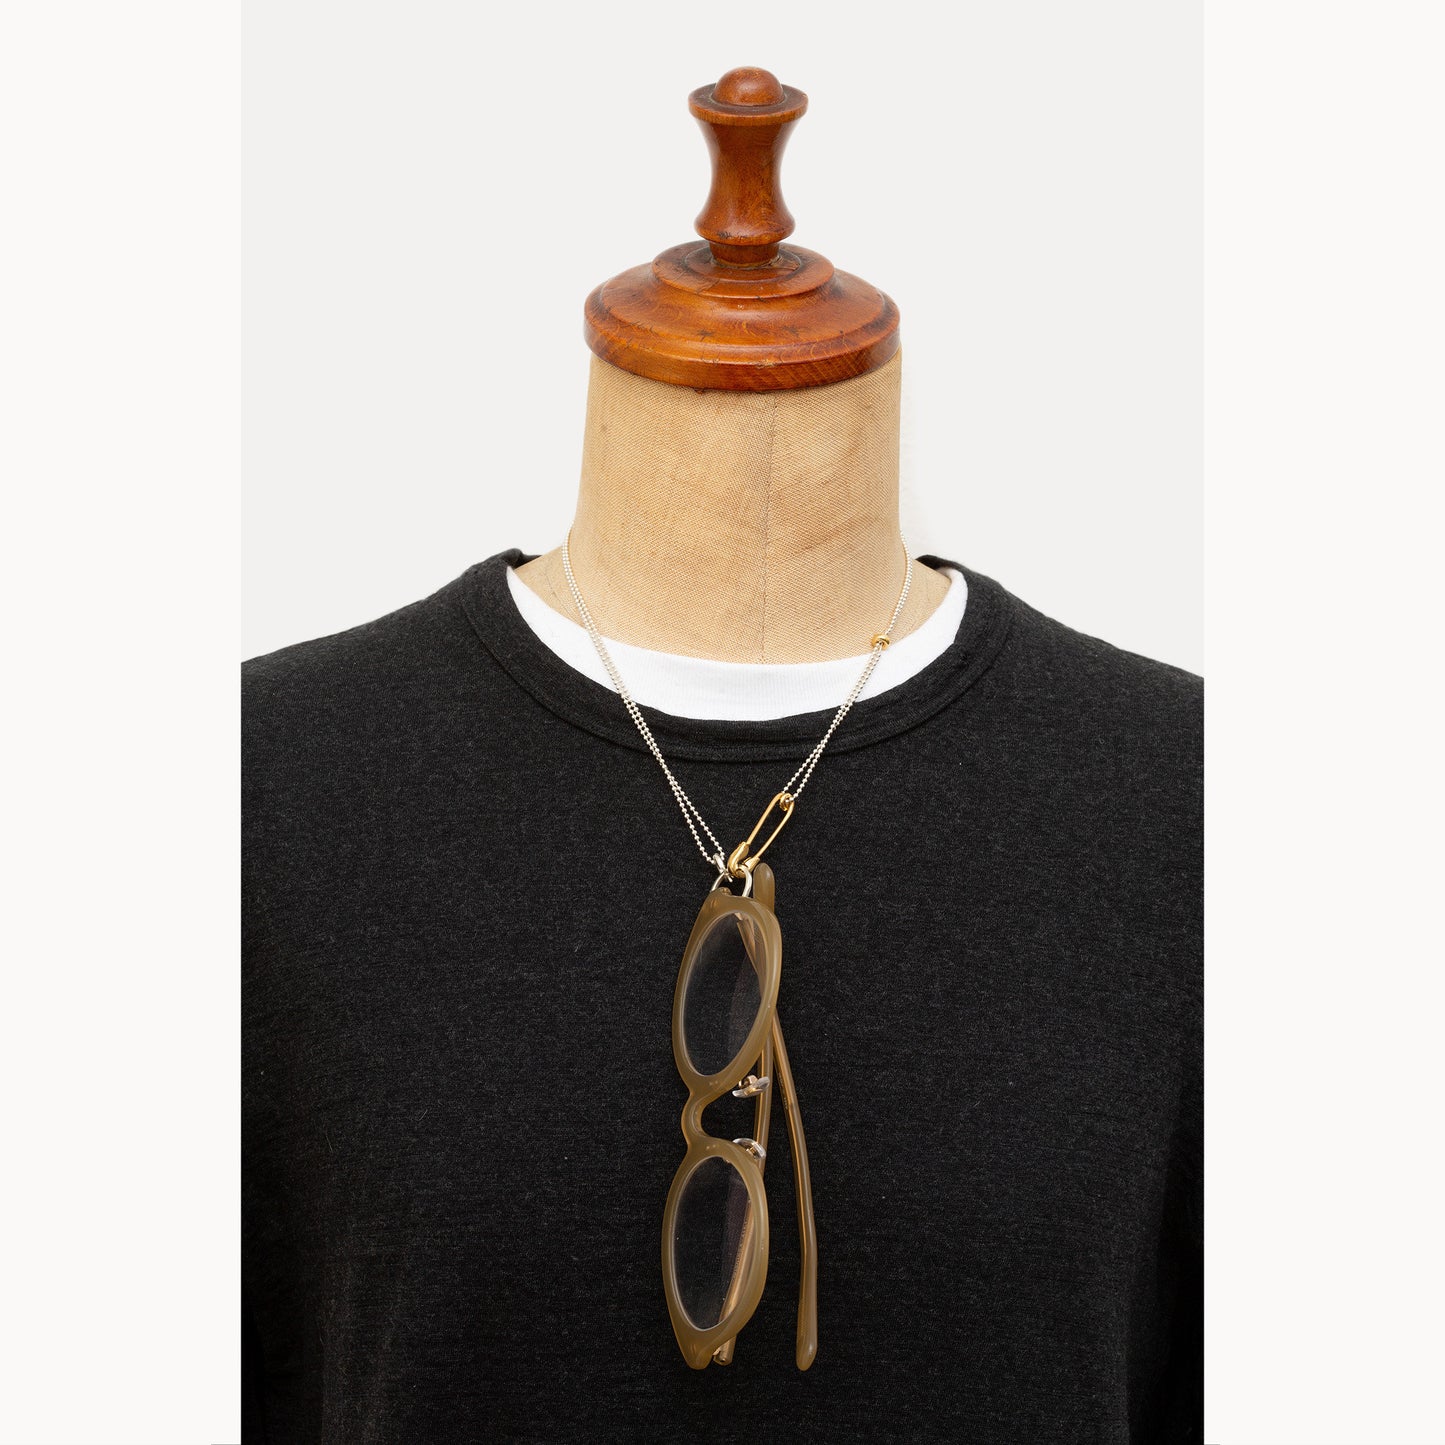 Safety Pin Necklace / Glasses Holder | 1905N011212